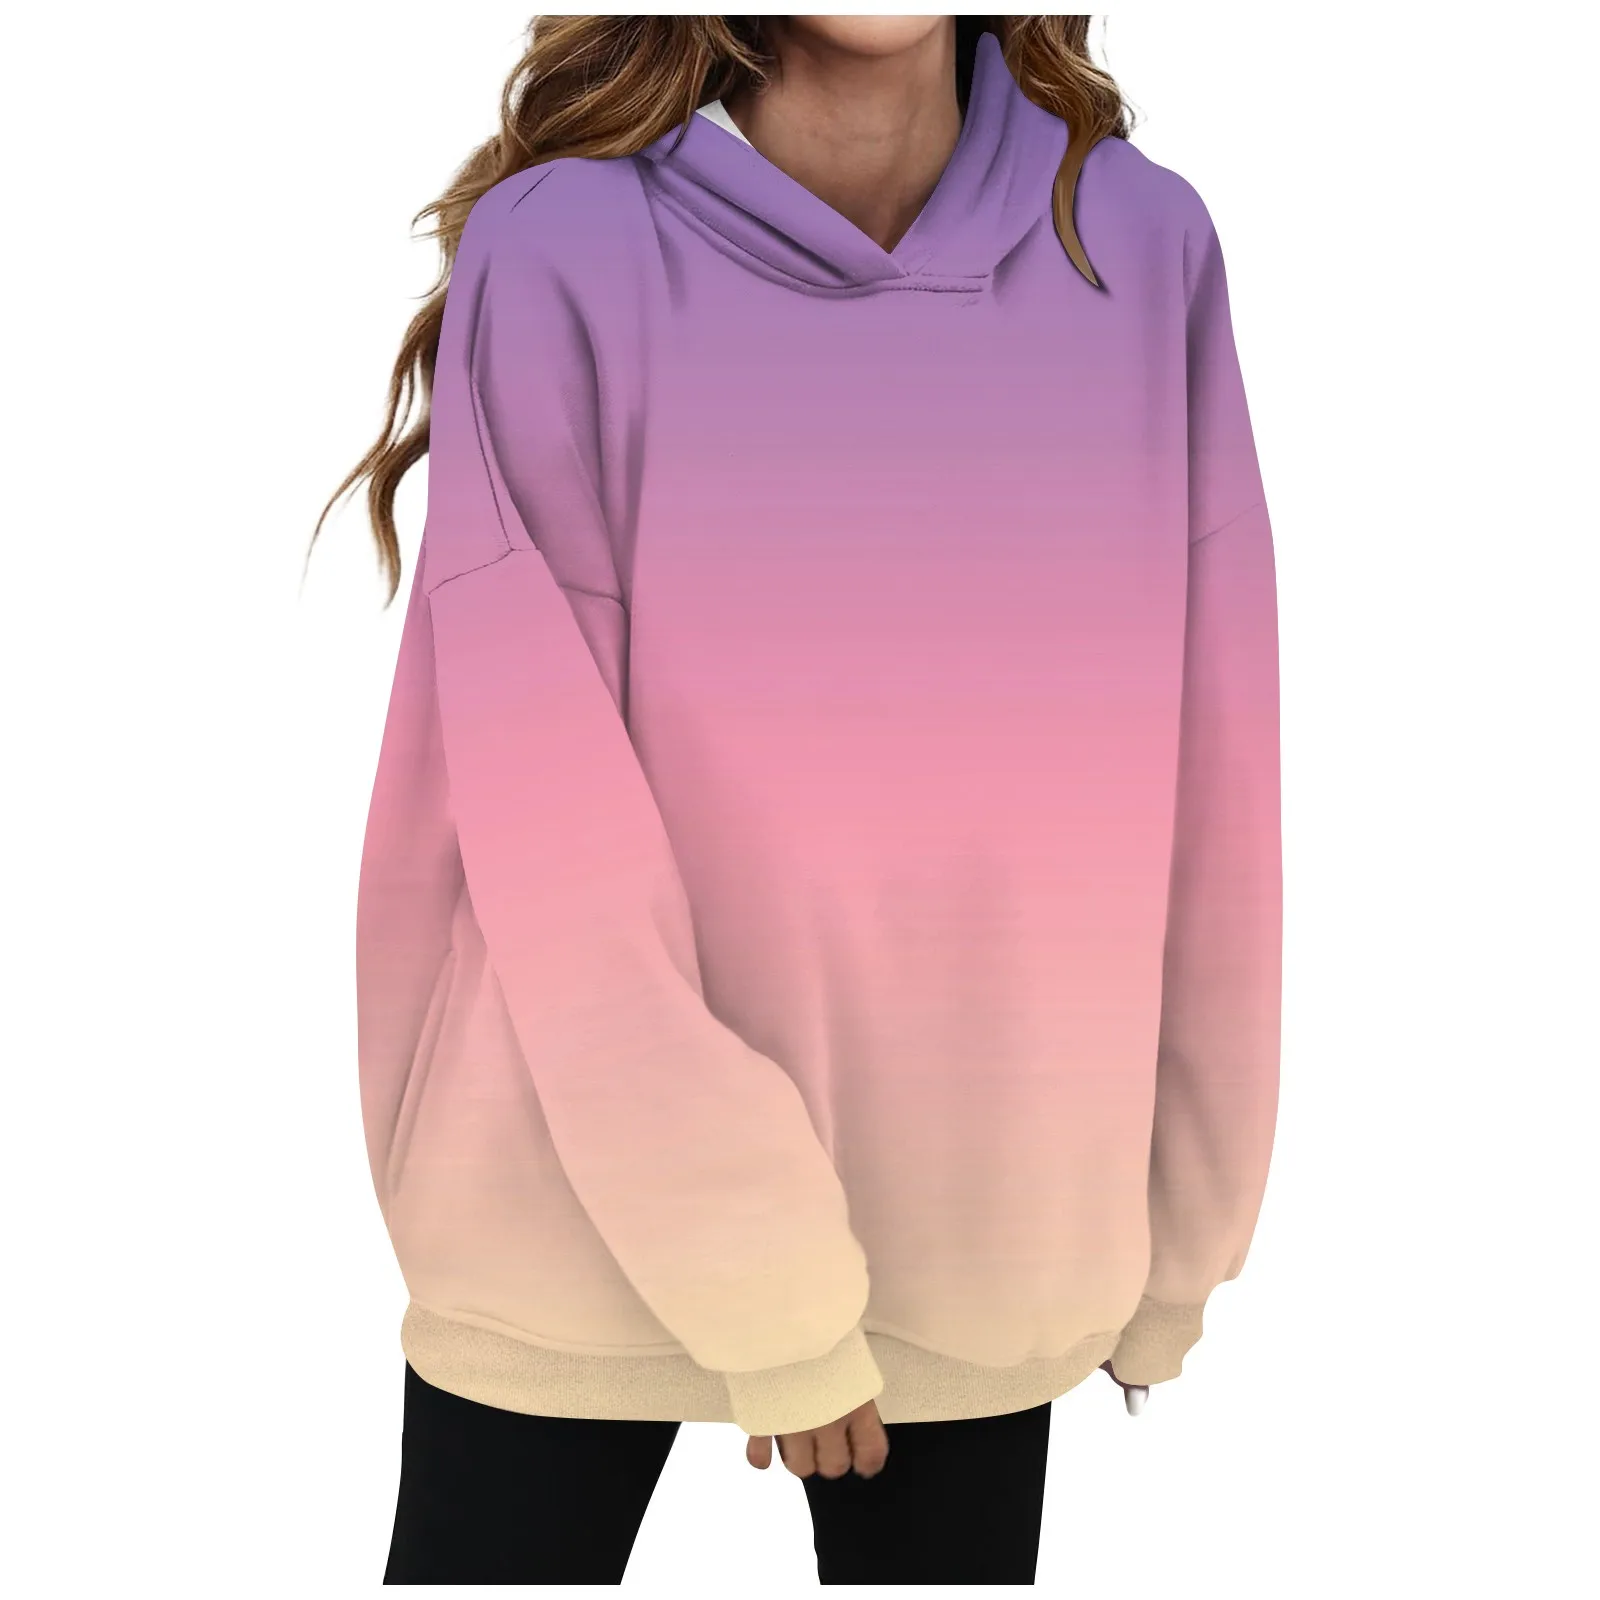 

Gradient Printed Loose Sweatshirts For Women Long Sleeve Hooded Clothes With Pocket Trendy Hoodies For Teen Girls зип худи